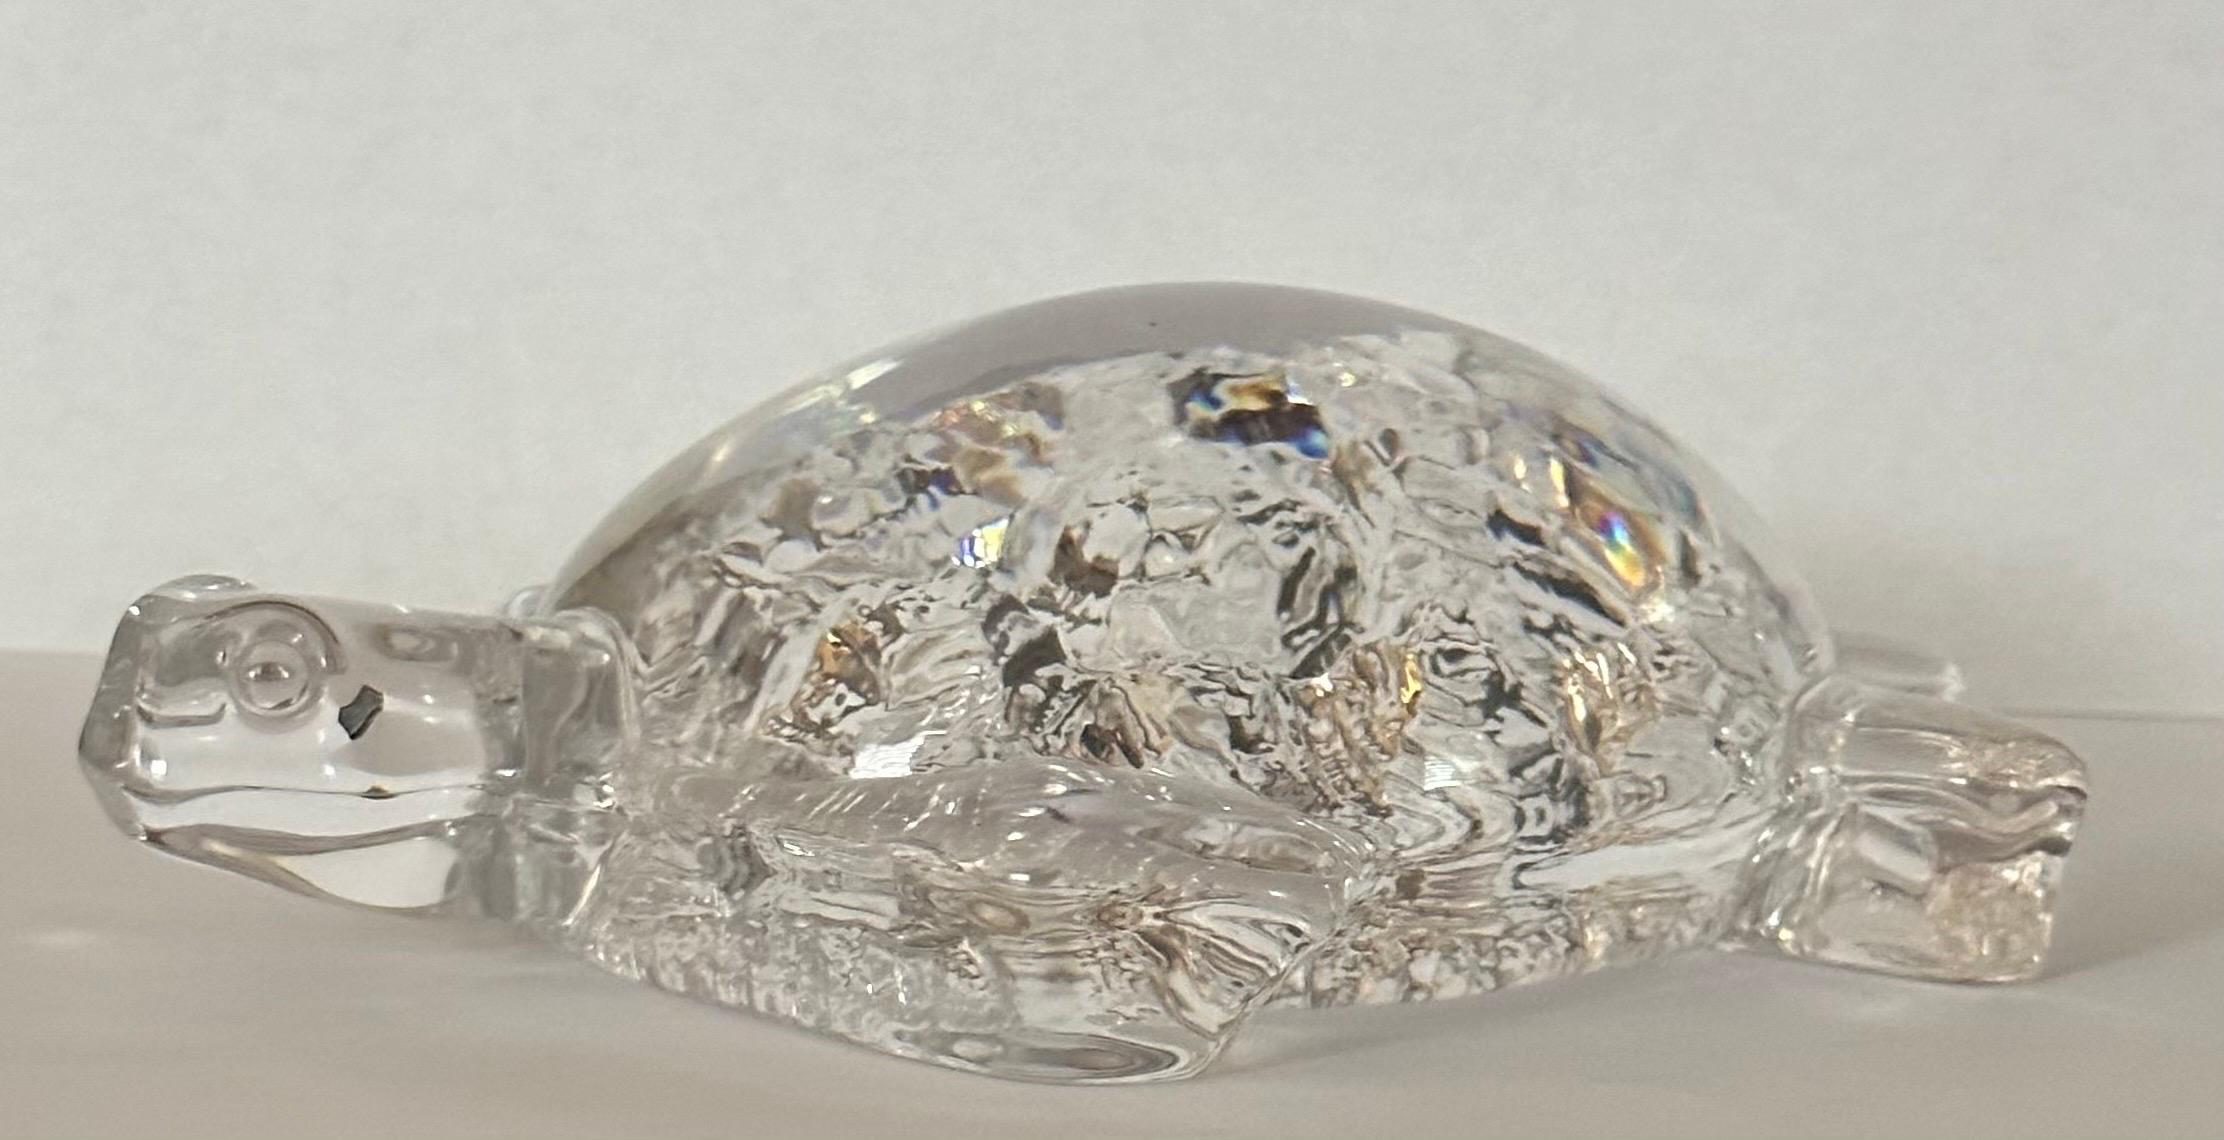 Stylized Crystal Turtle Sculpture / Paperweight by Daum France 1